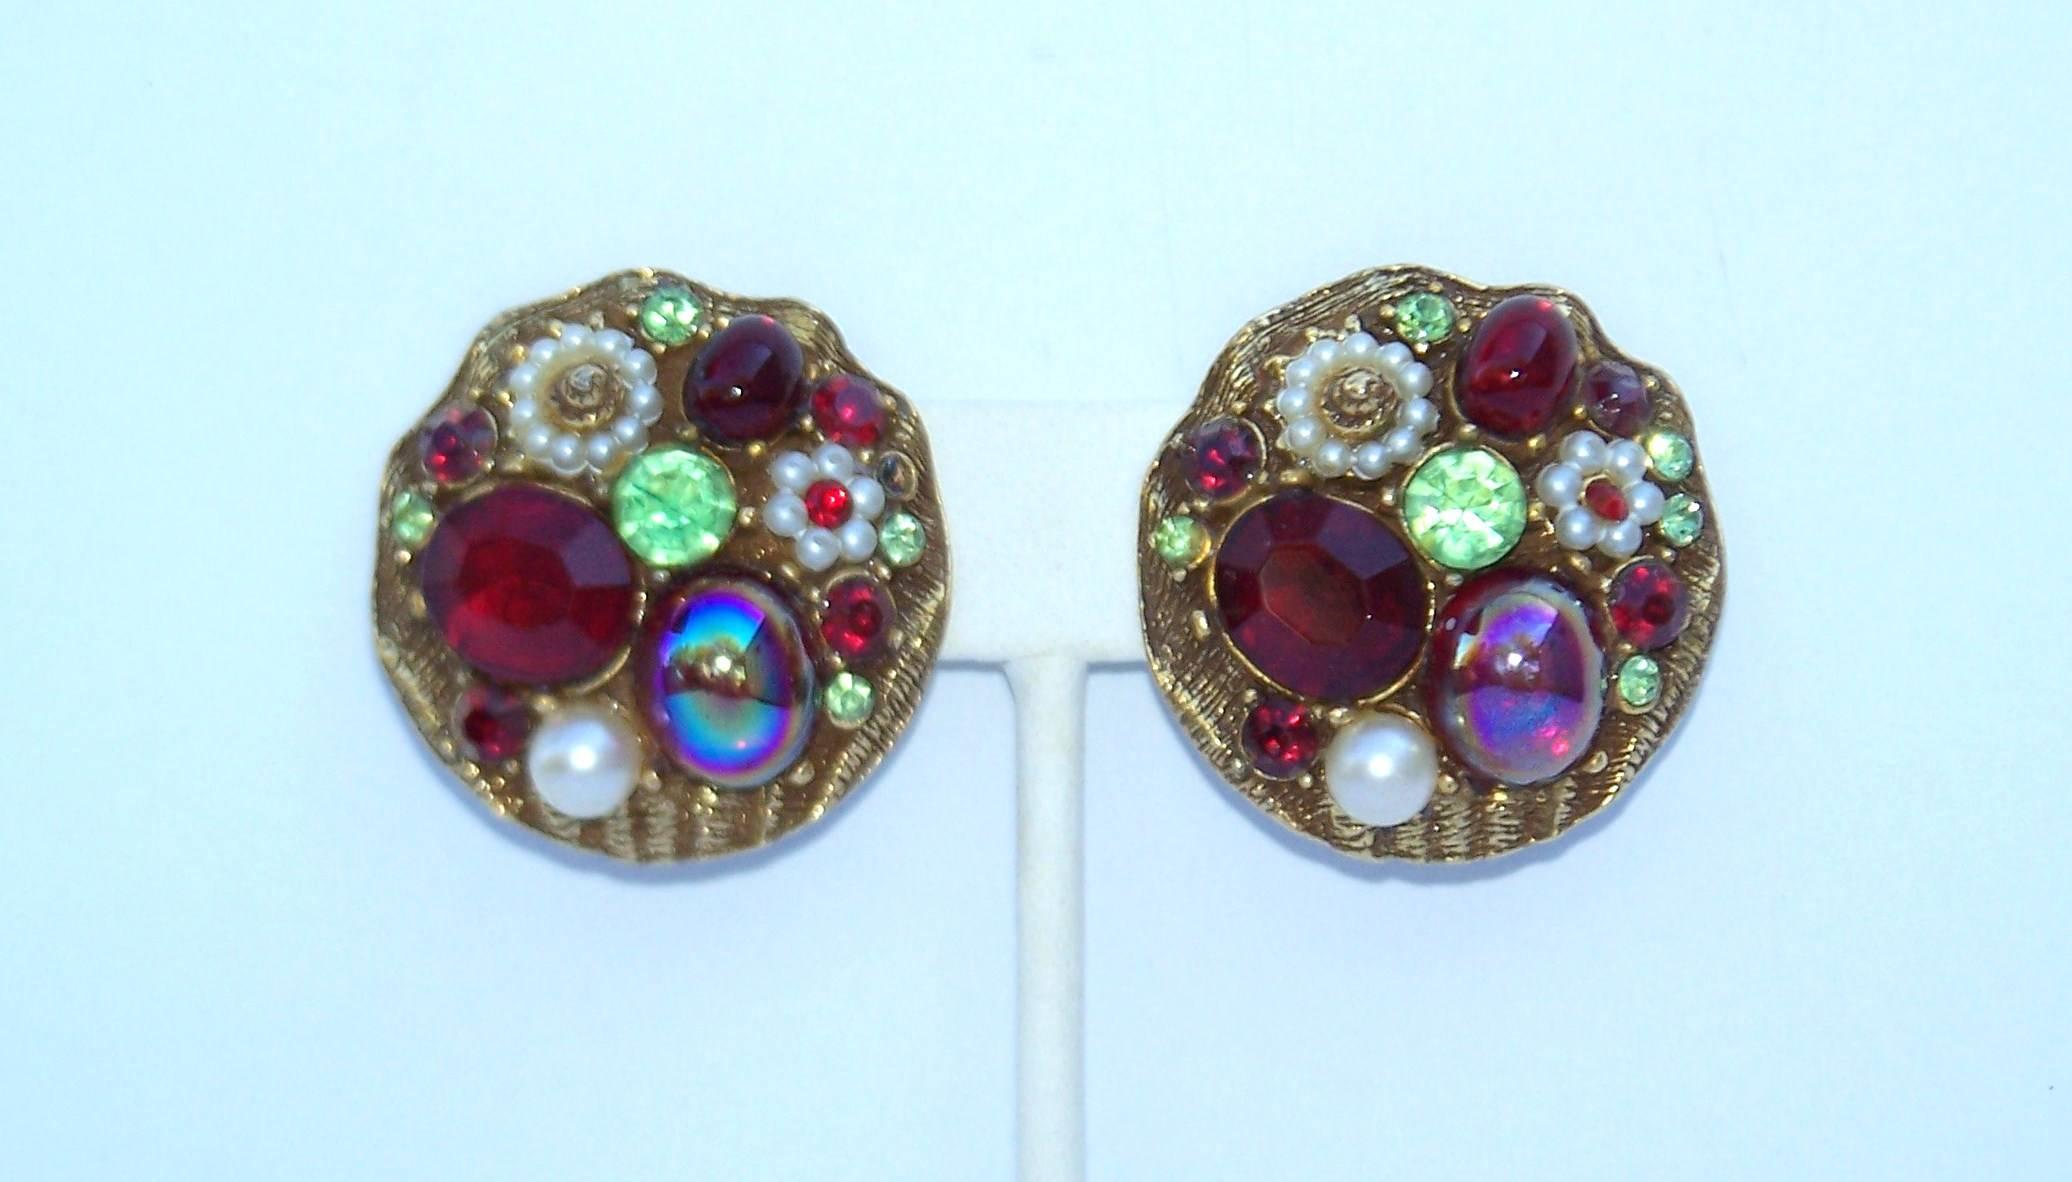 These 1950's clip on earrings look like the booty from a treasure chest...rubies, pearls, emeralds, gold...all costume but lovely nonetheless.  The scalloped shape base is weighty and detailed with a subtle sea shell design.  Though unsigned, they